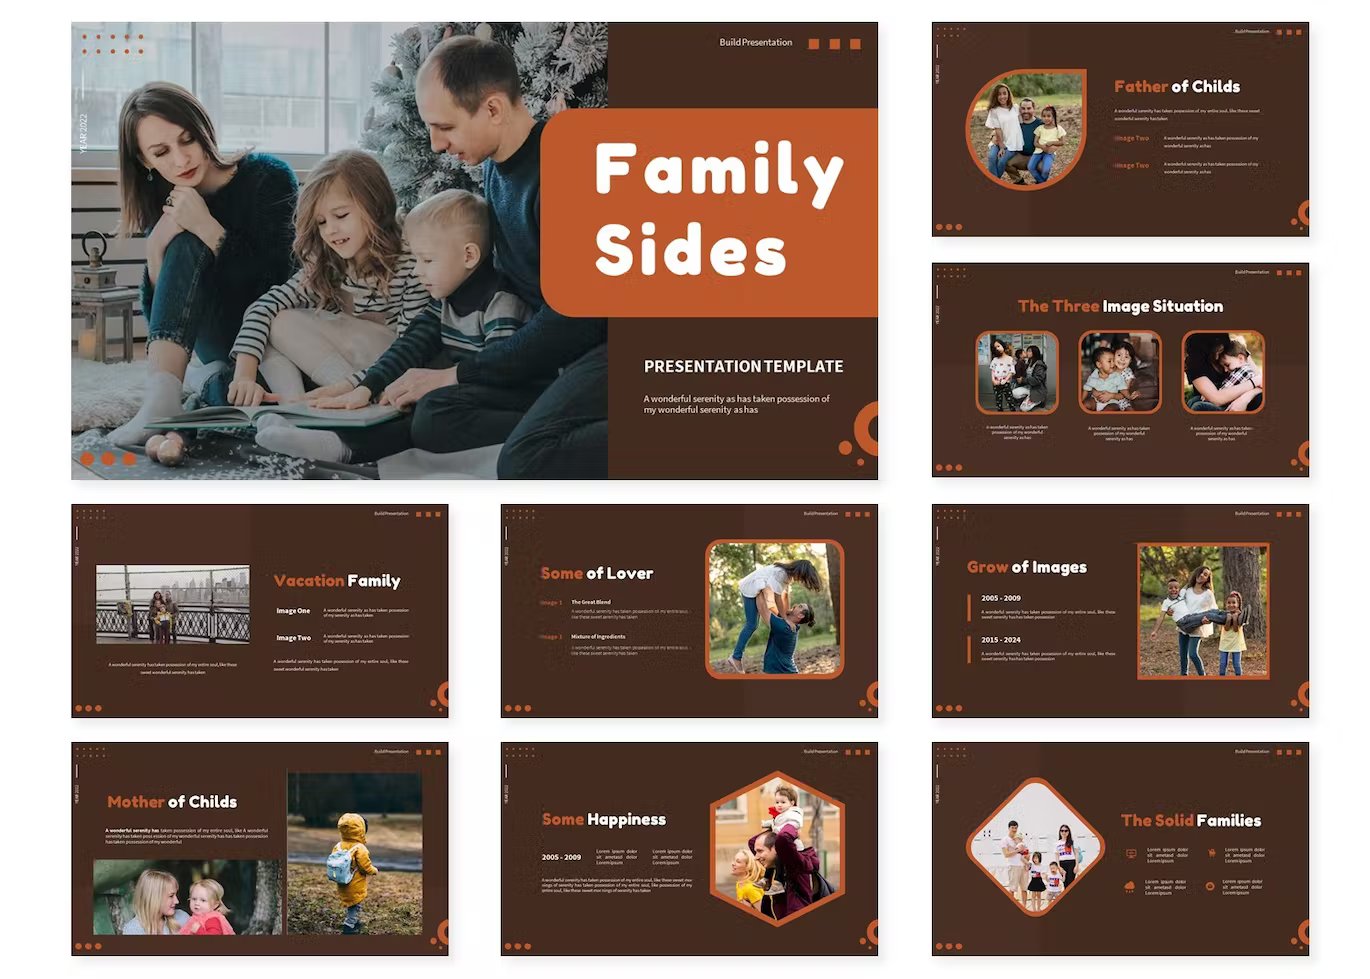 A set of 9 different family pages google slides templates in brown, orange and white on a white background.